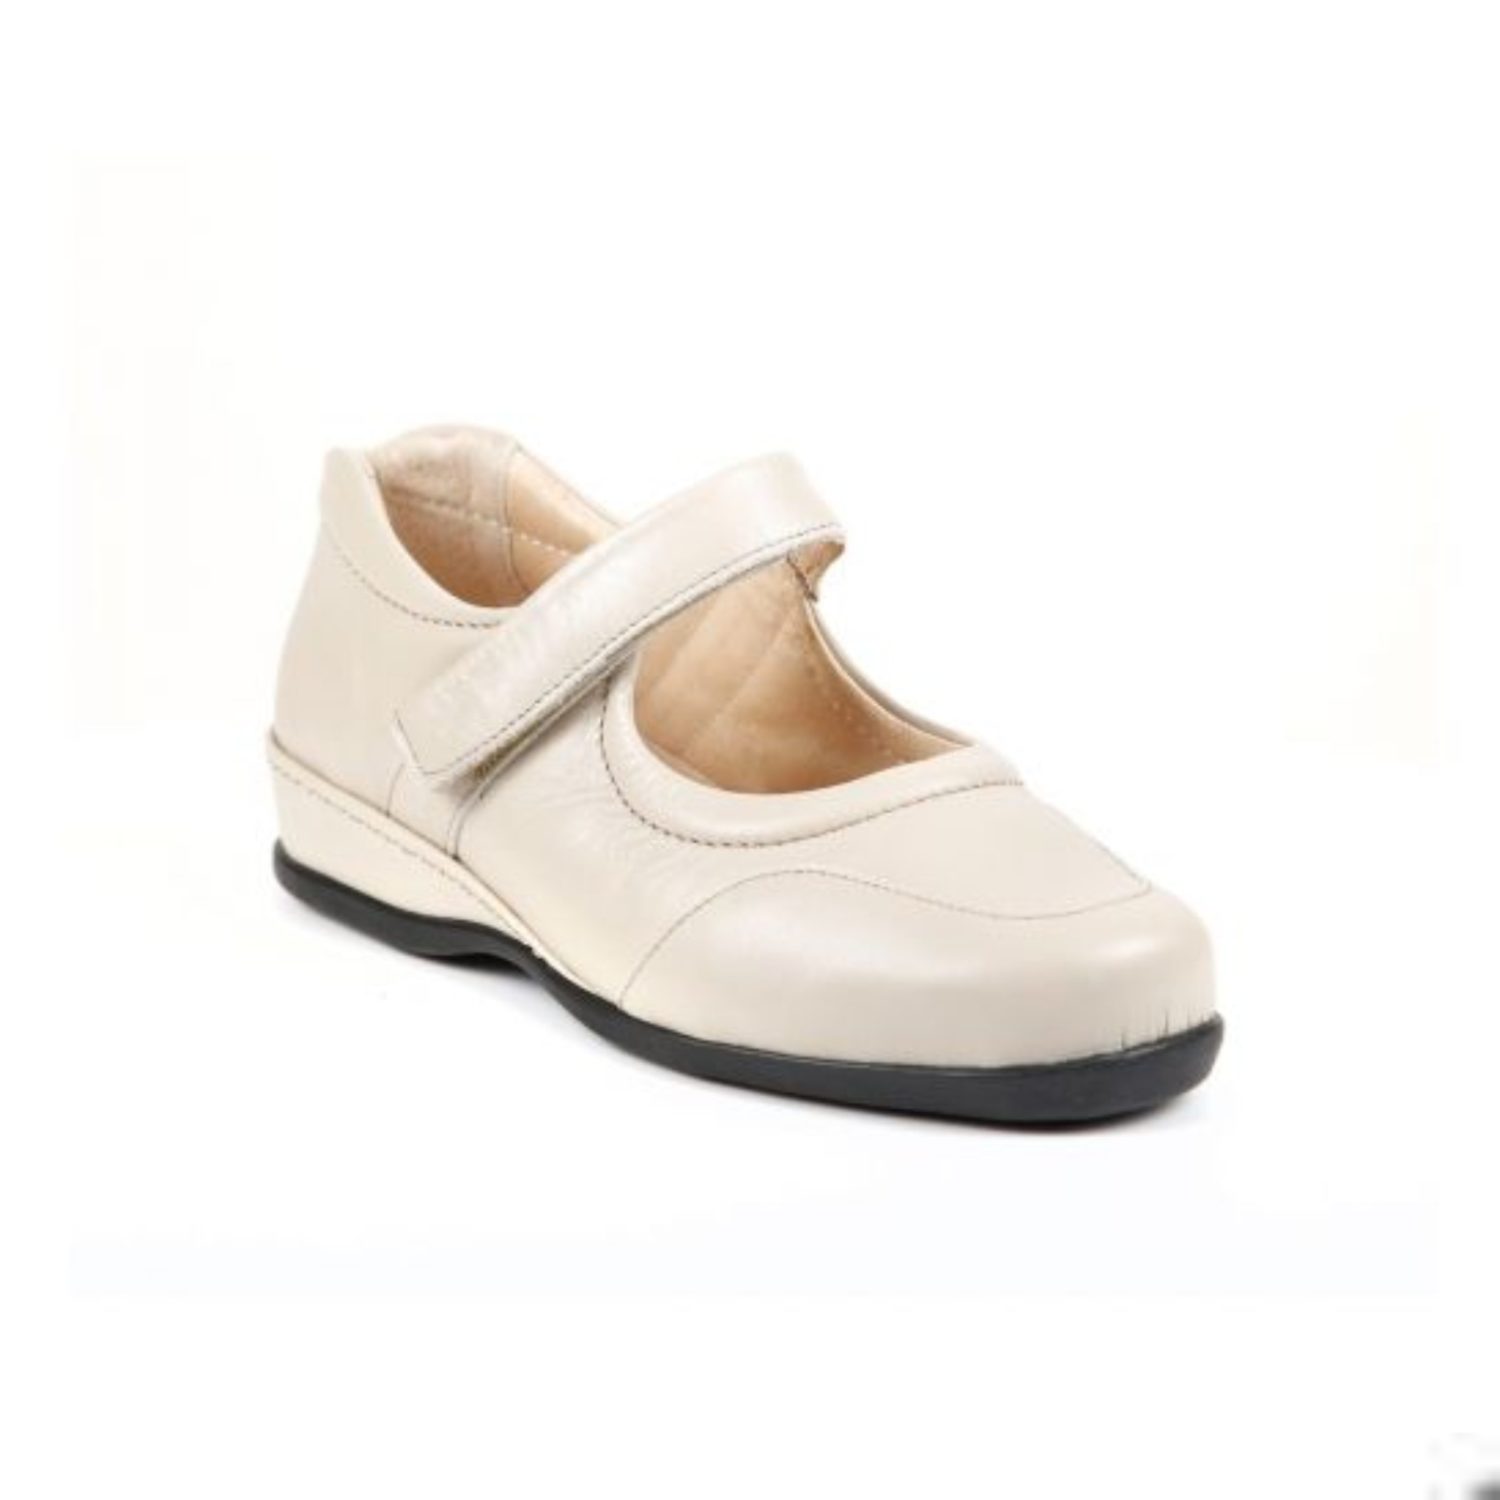 Sandpiper Welton Ladies Extra Wide Shoe 4E-6E by Sandpiper | Simplelife ...